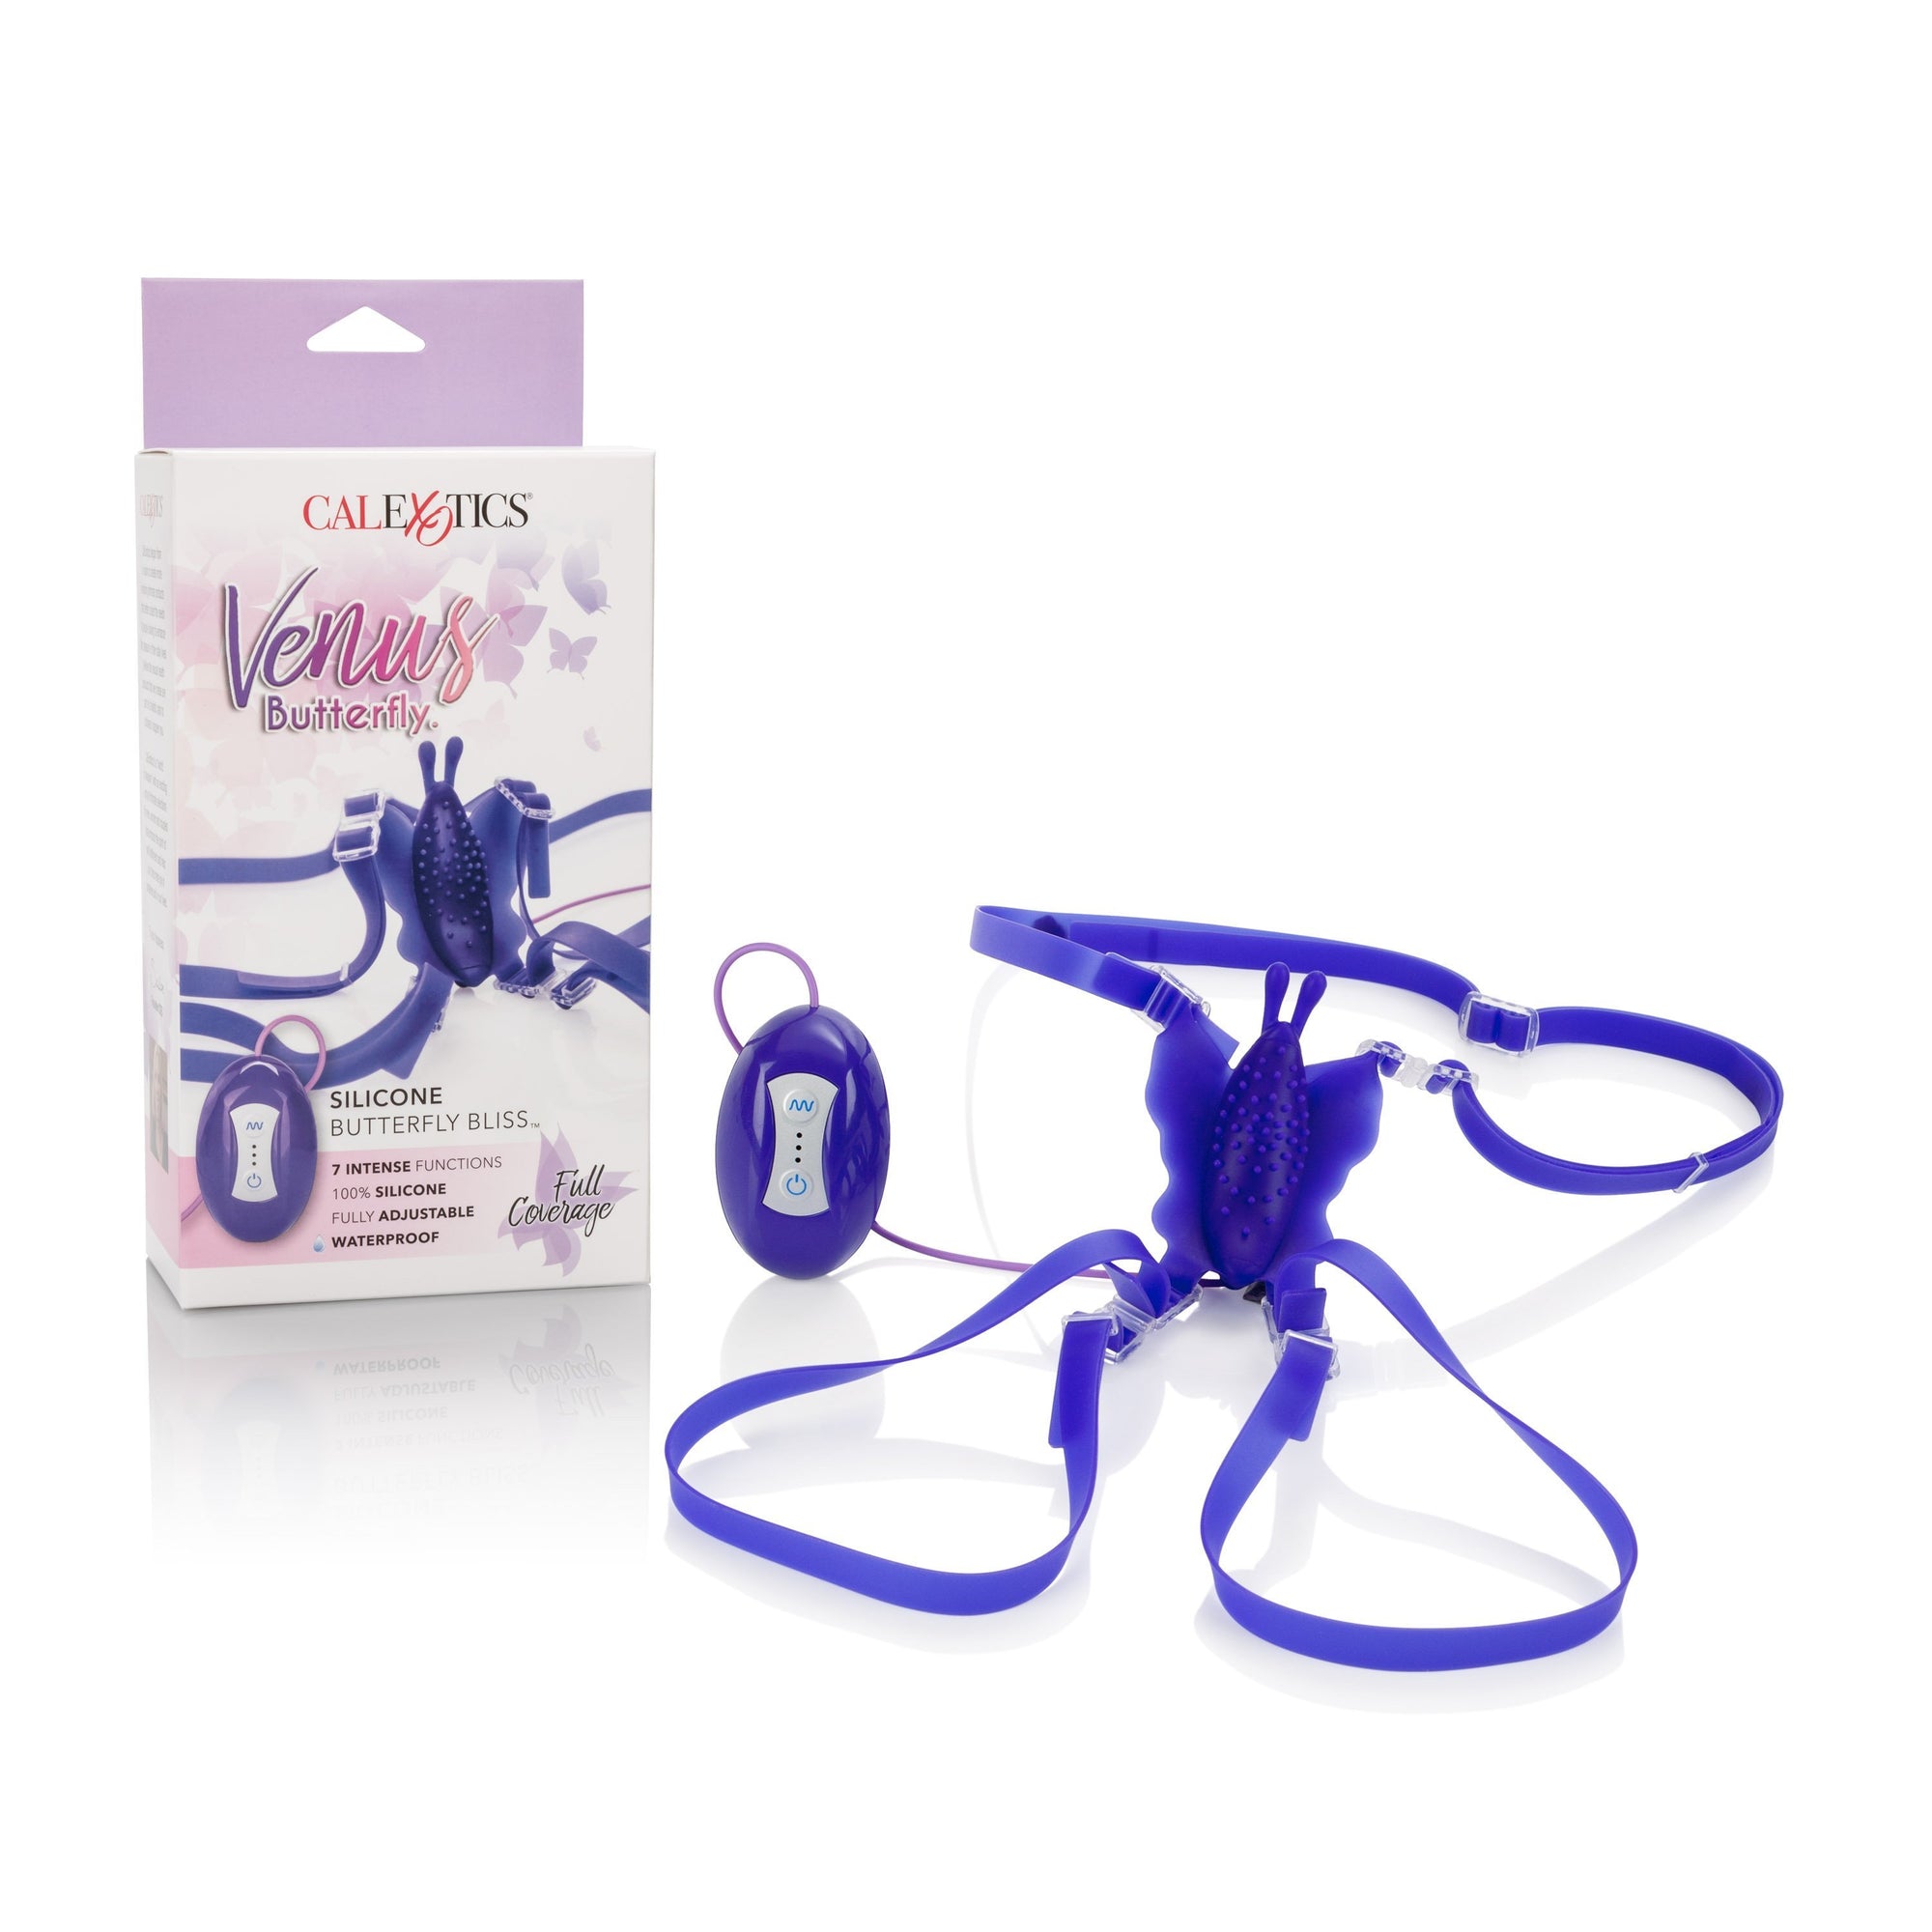 California Exotics - Venus 7 Function Silicone Butterfly Bliss Clit Massager (Purple) Clit Massager (Vibration) Non Rechargeable Durio Asia